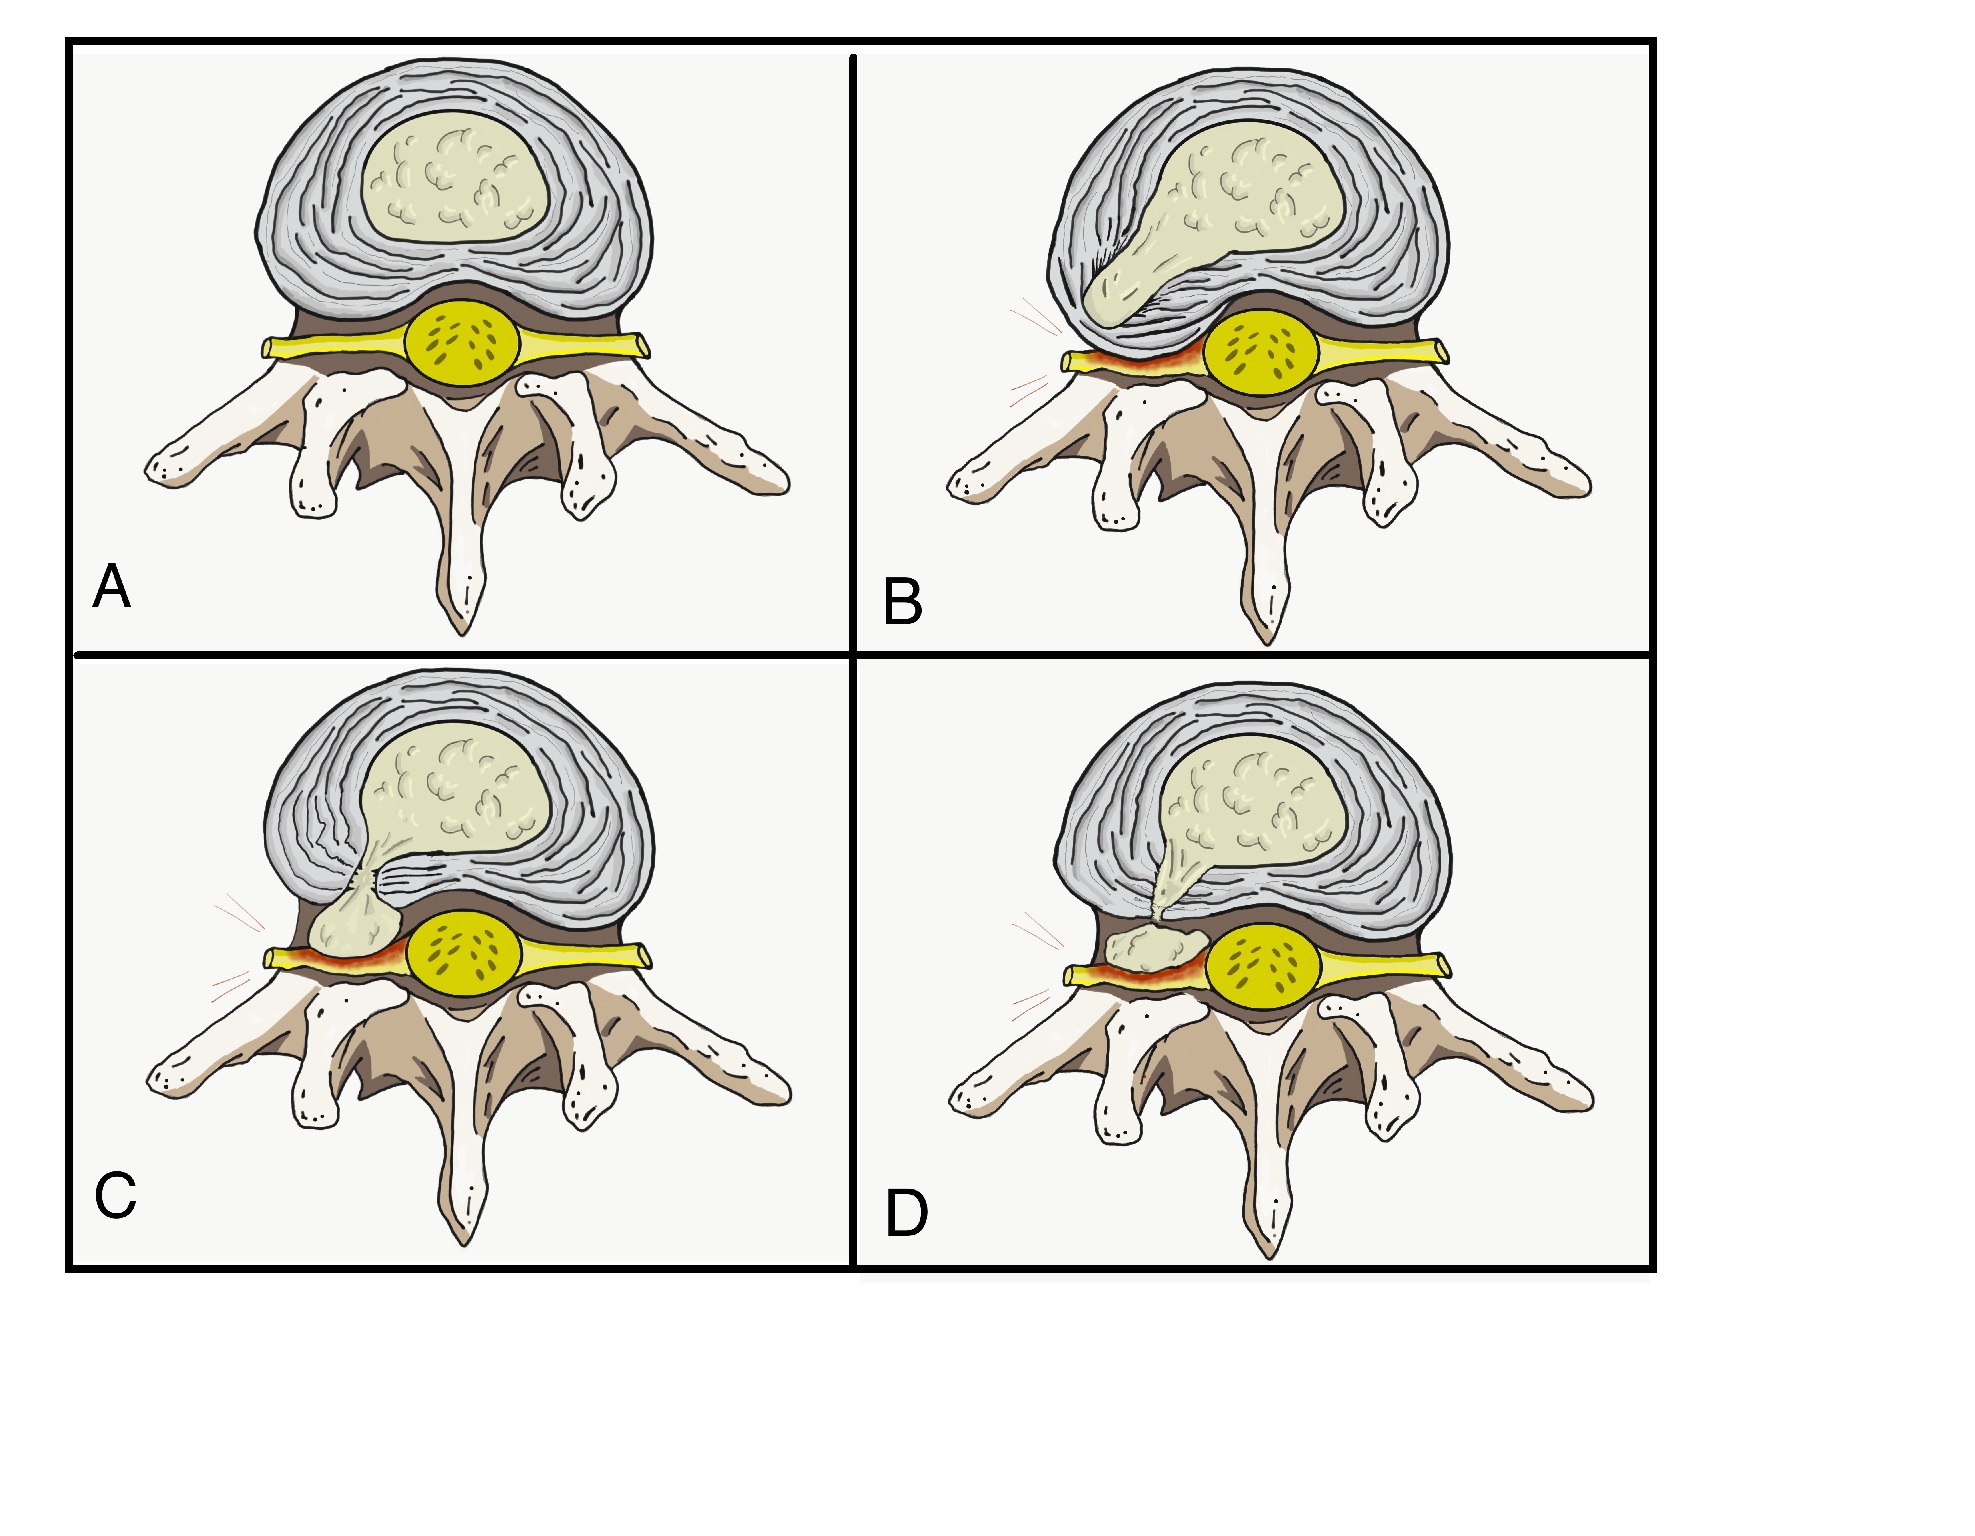 <p>Stages of Nucleus Pulposus Herniation. A. Normal B. Bulging C. Protrusion D. Herniation</p>